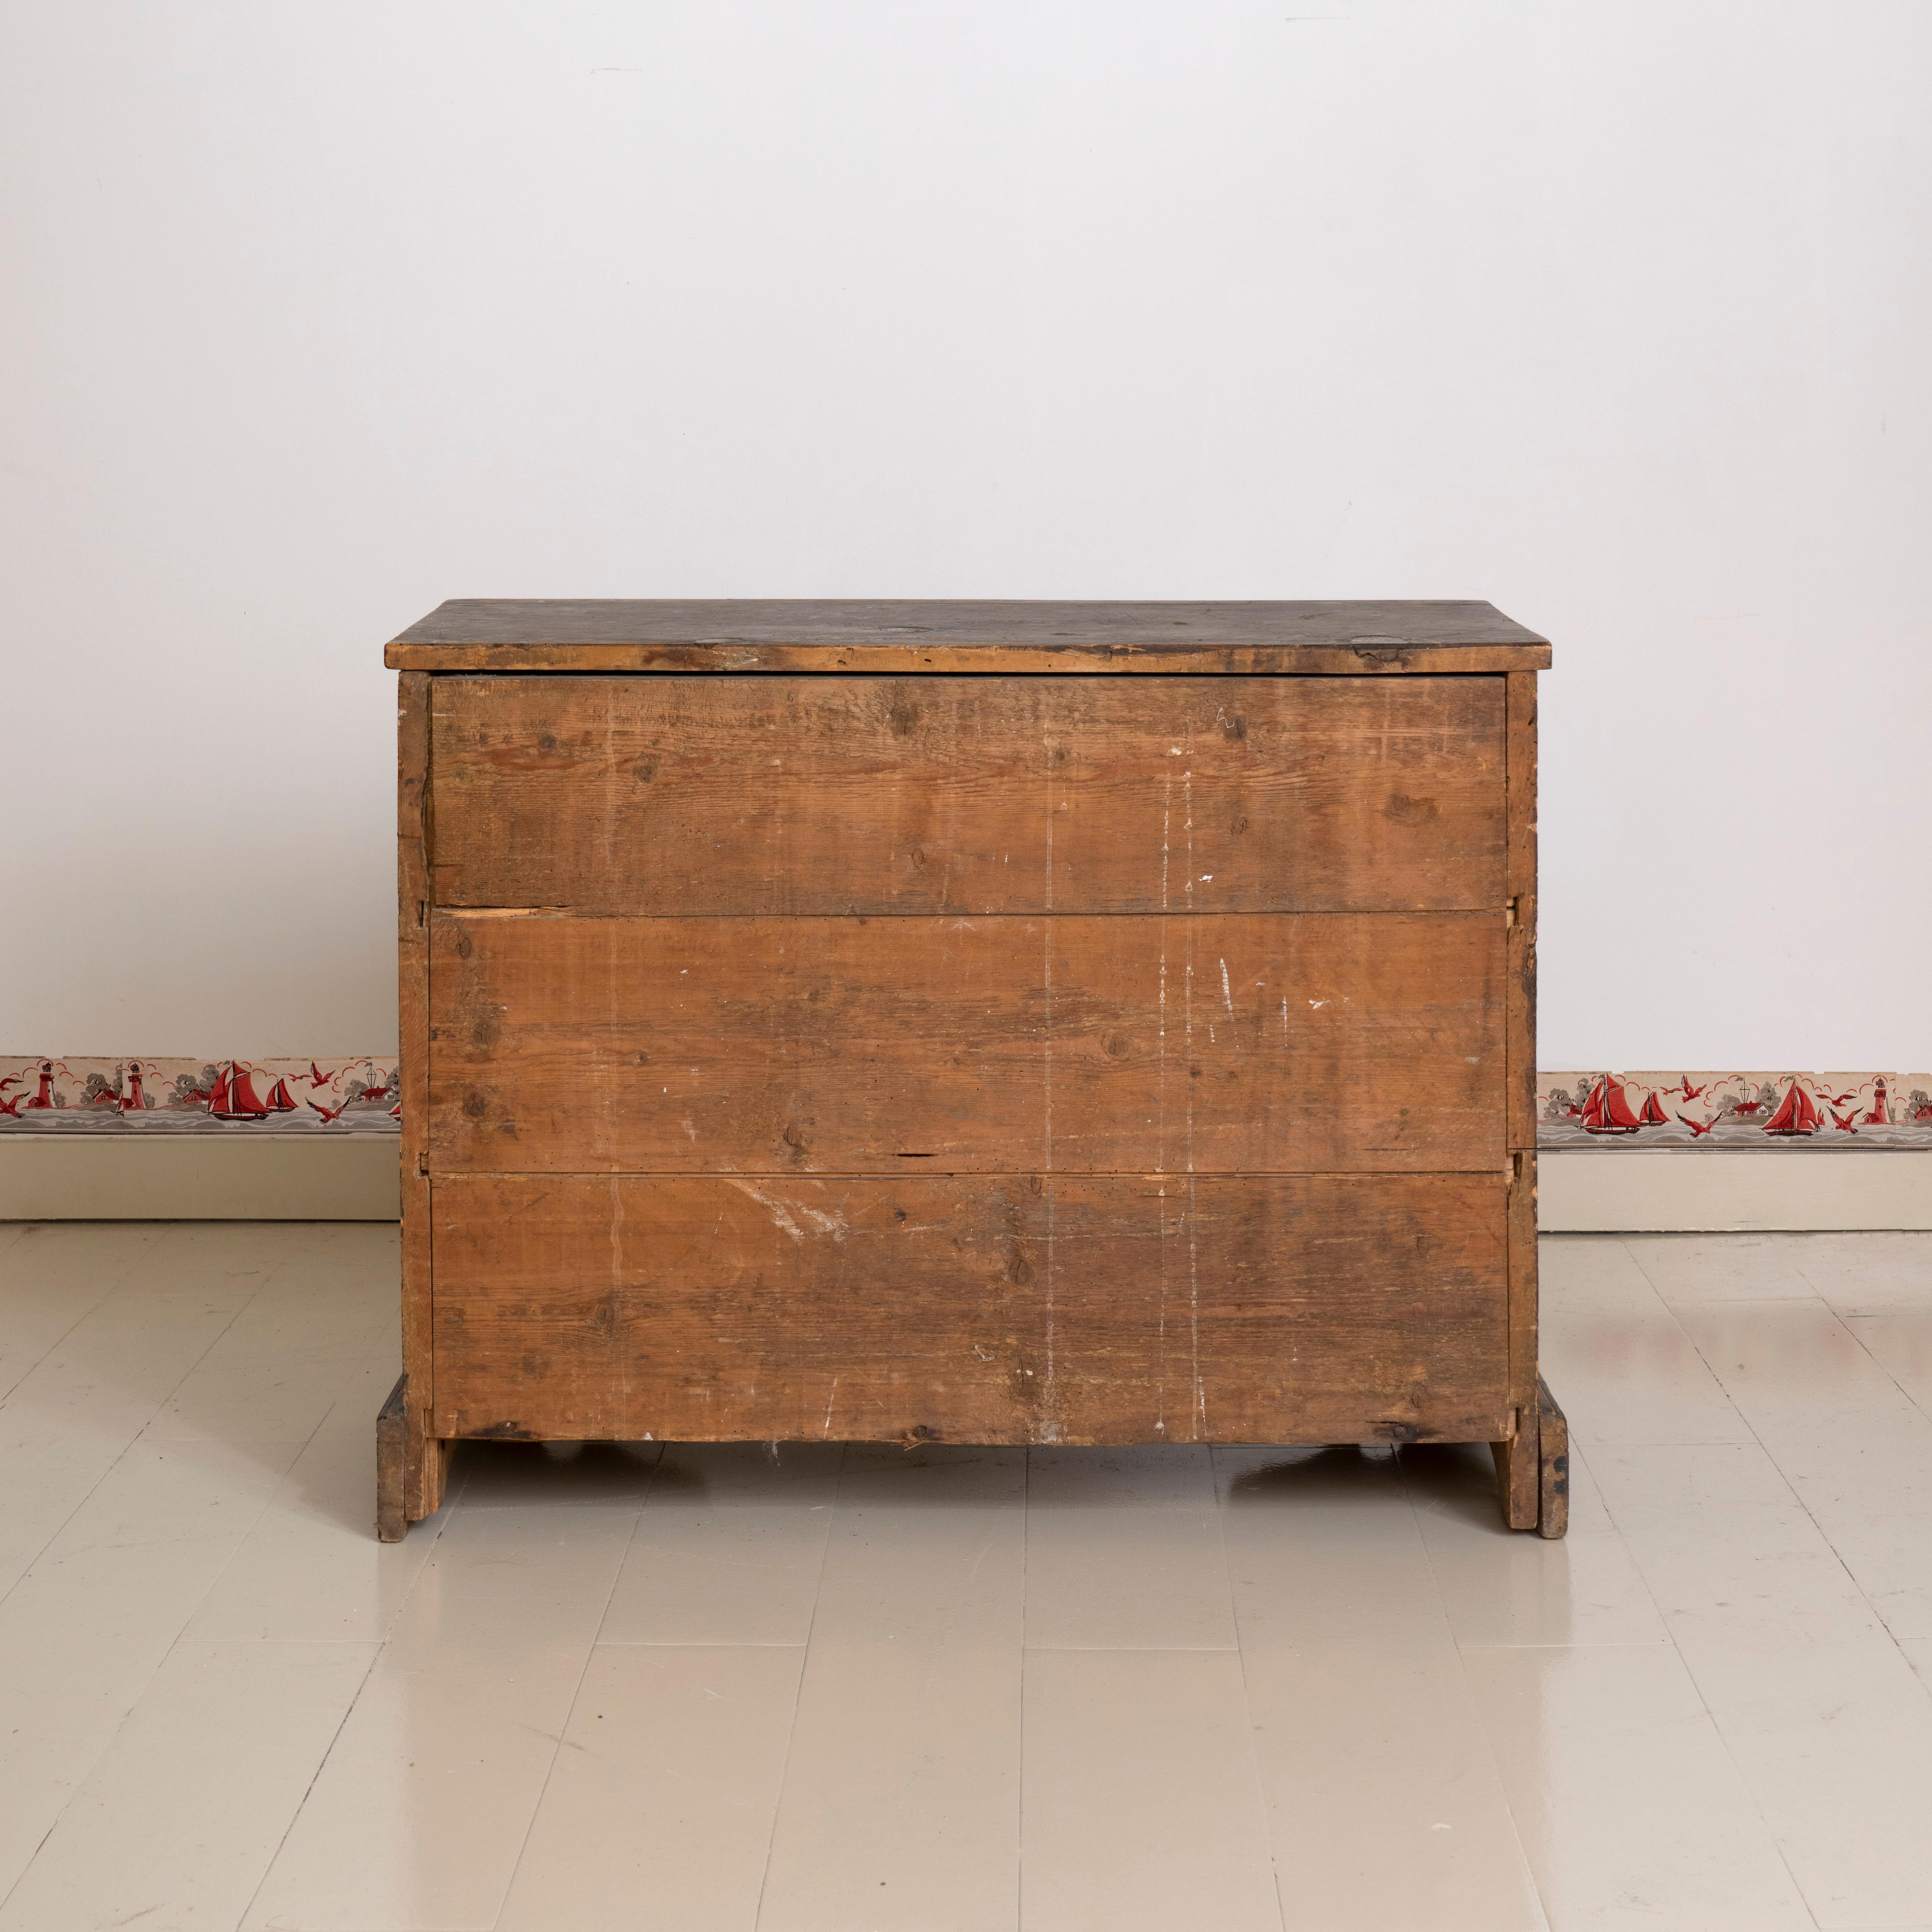 North American 19th Century American Folk Painted Chest of Drawers